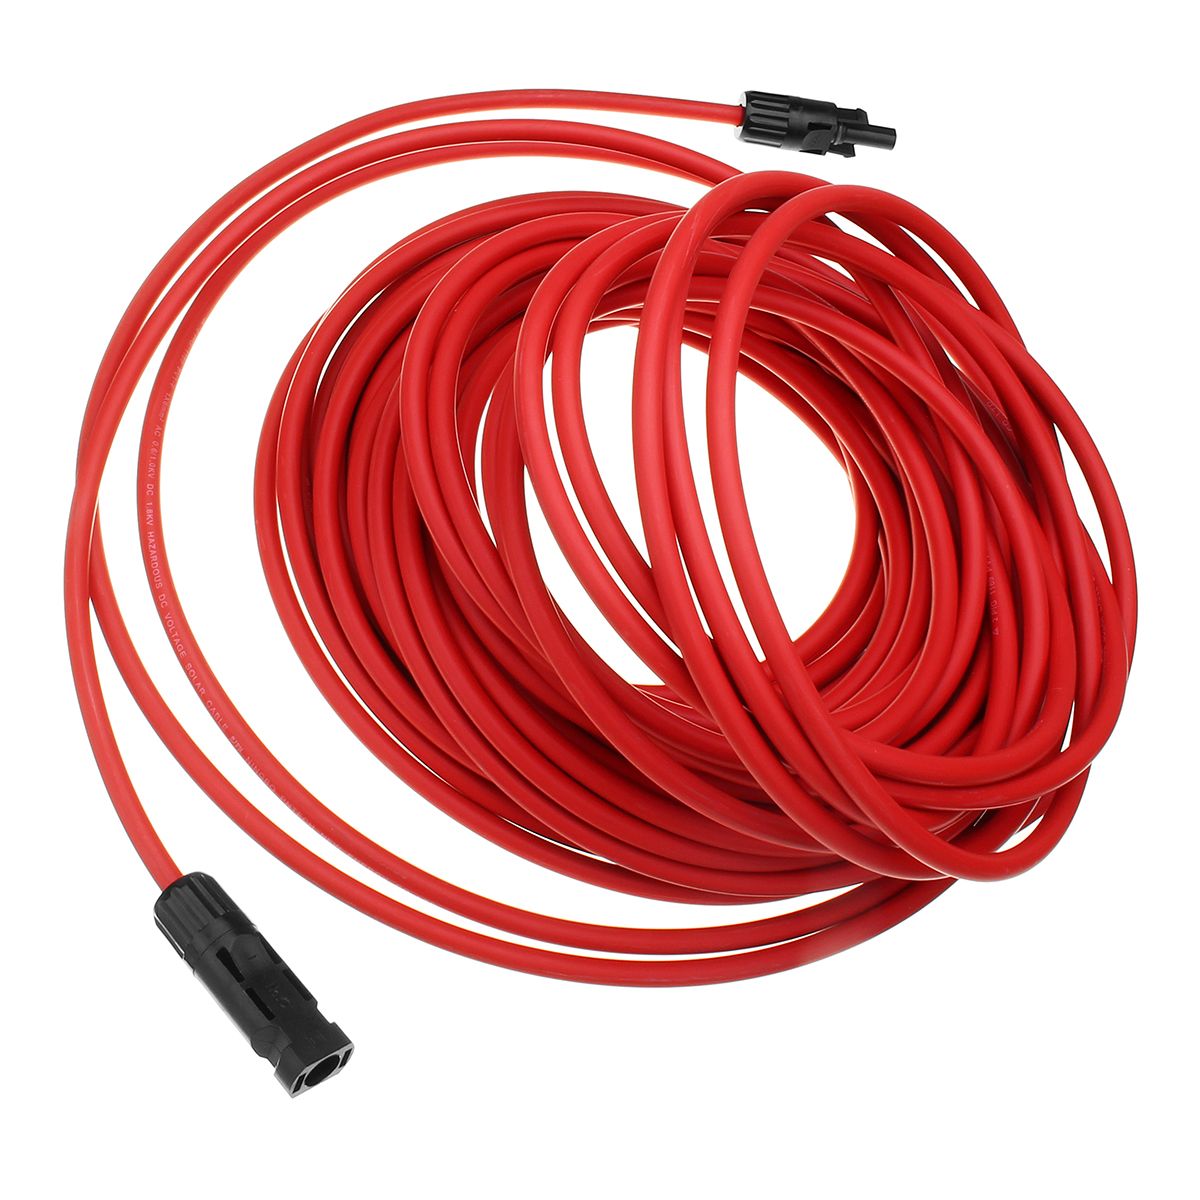 10-AWG-20-Meter-Solar-Panel-Extension-Cable-Wire-BlackRed-with-MC4-Connectors-1338667